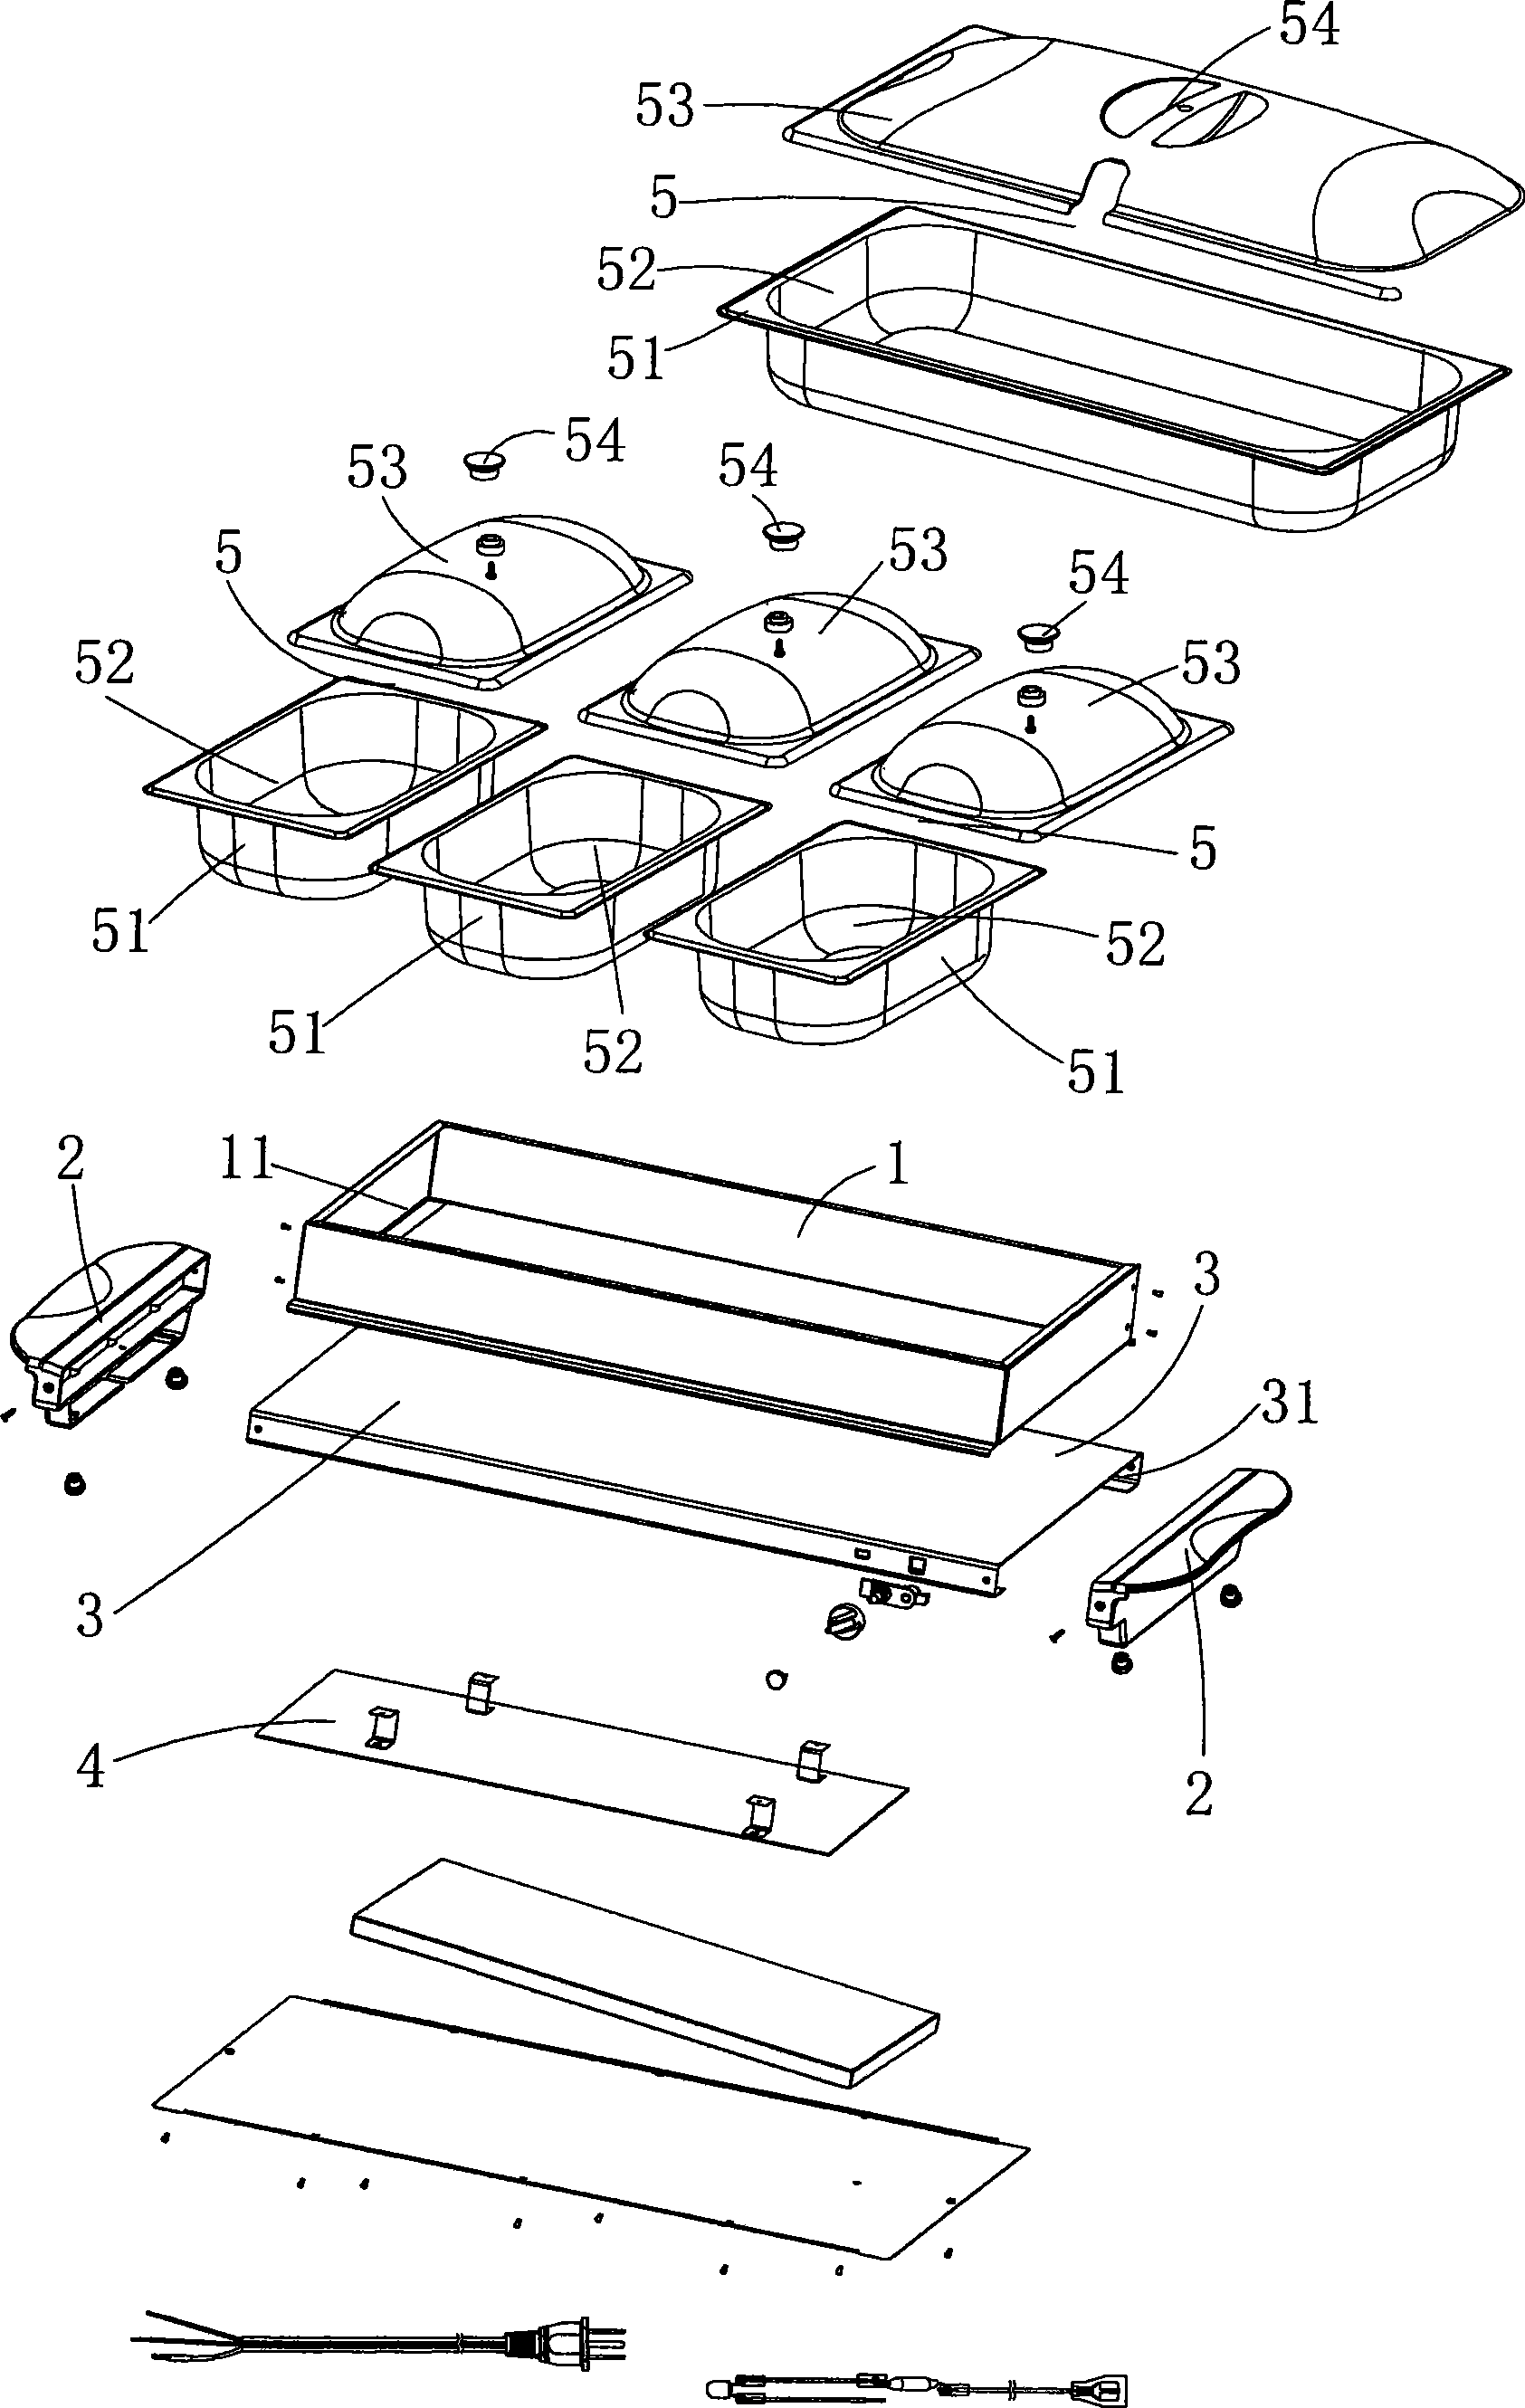 Thermal insulation plate structure